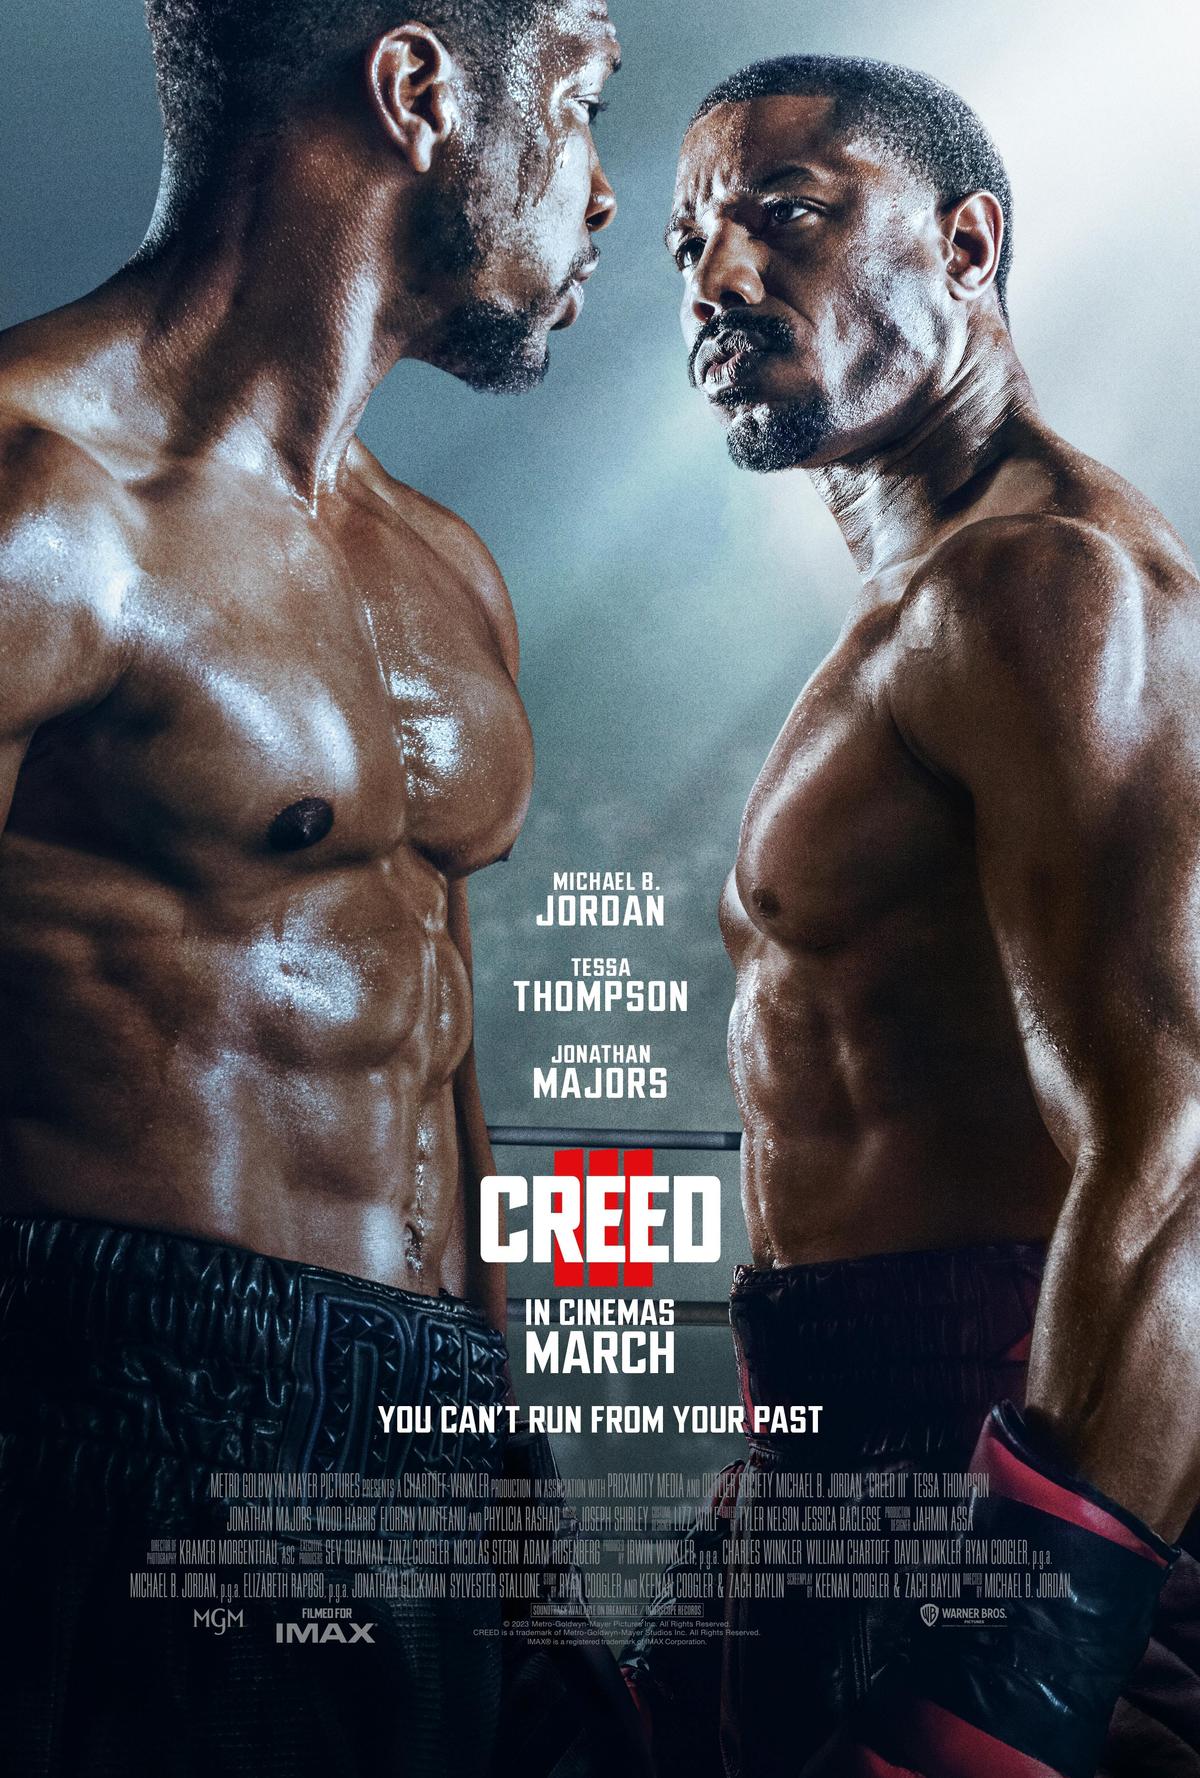 Movie poster for "Creed III."